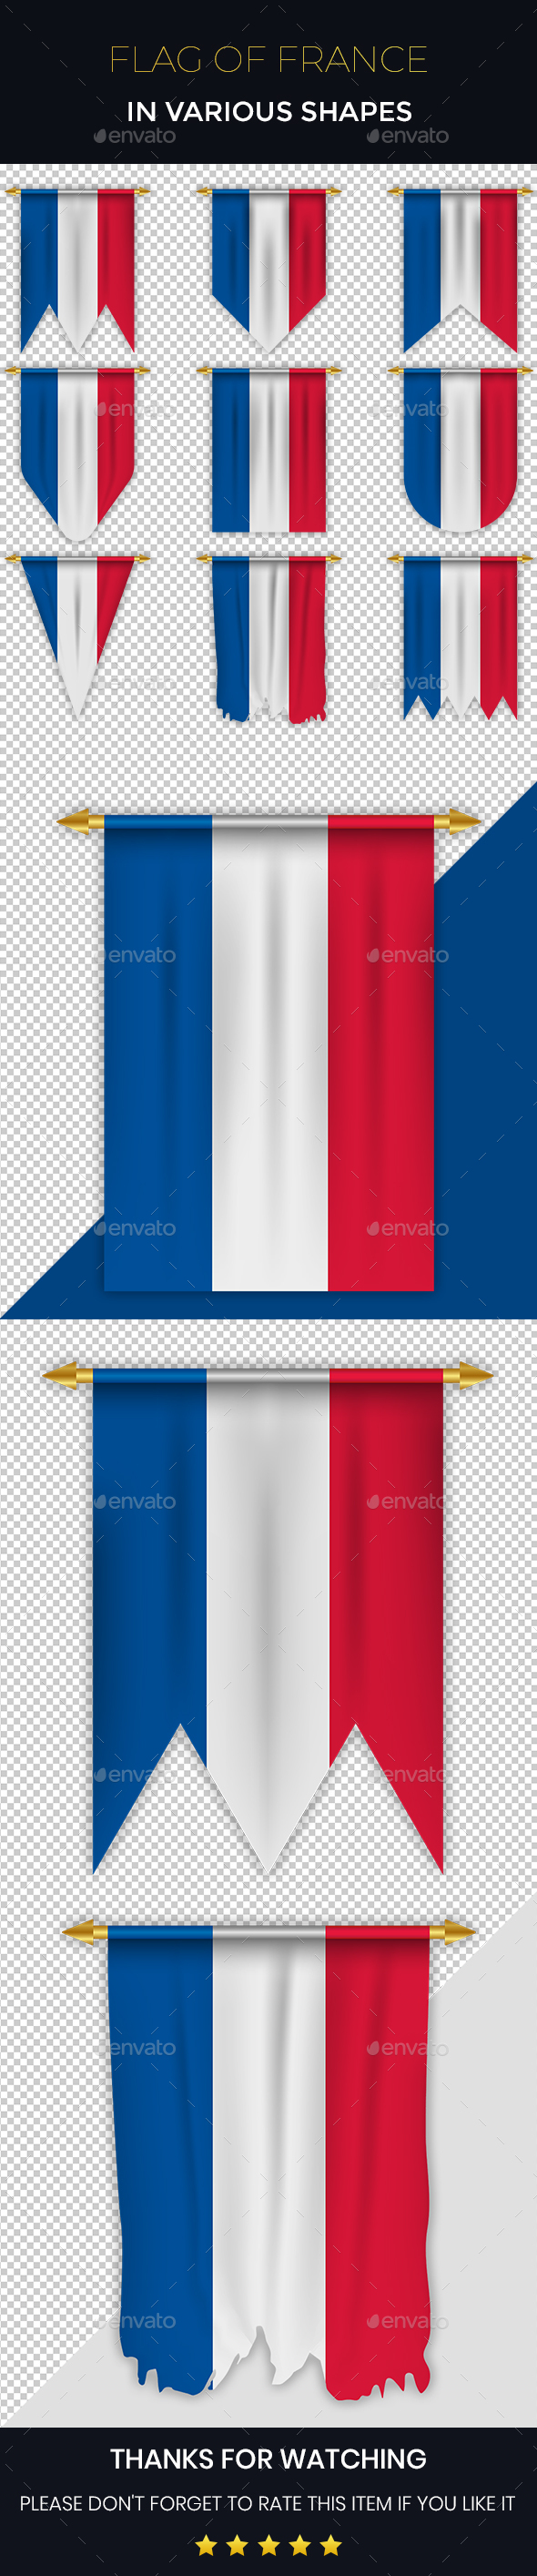 France Flag In Various Shapes